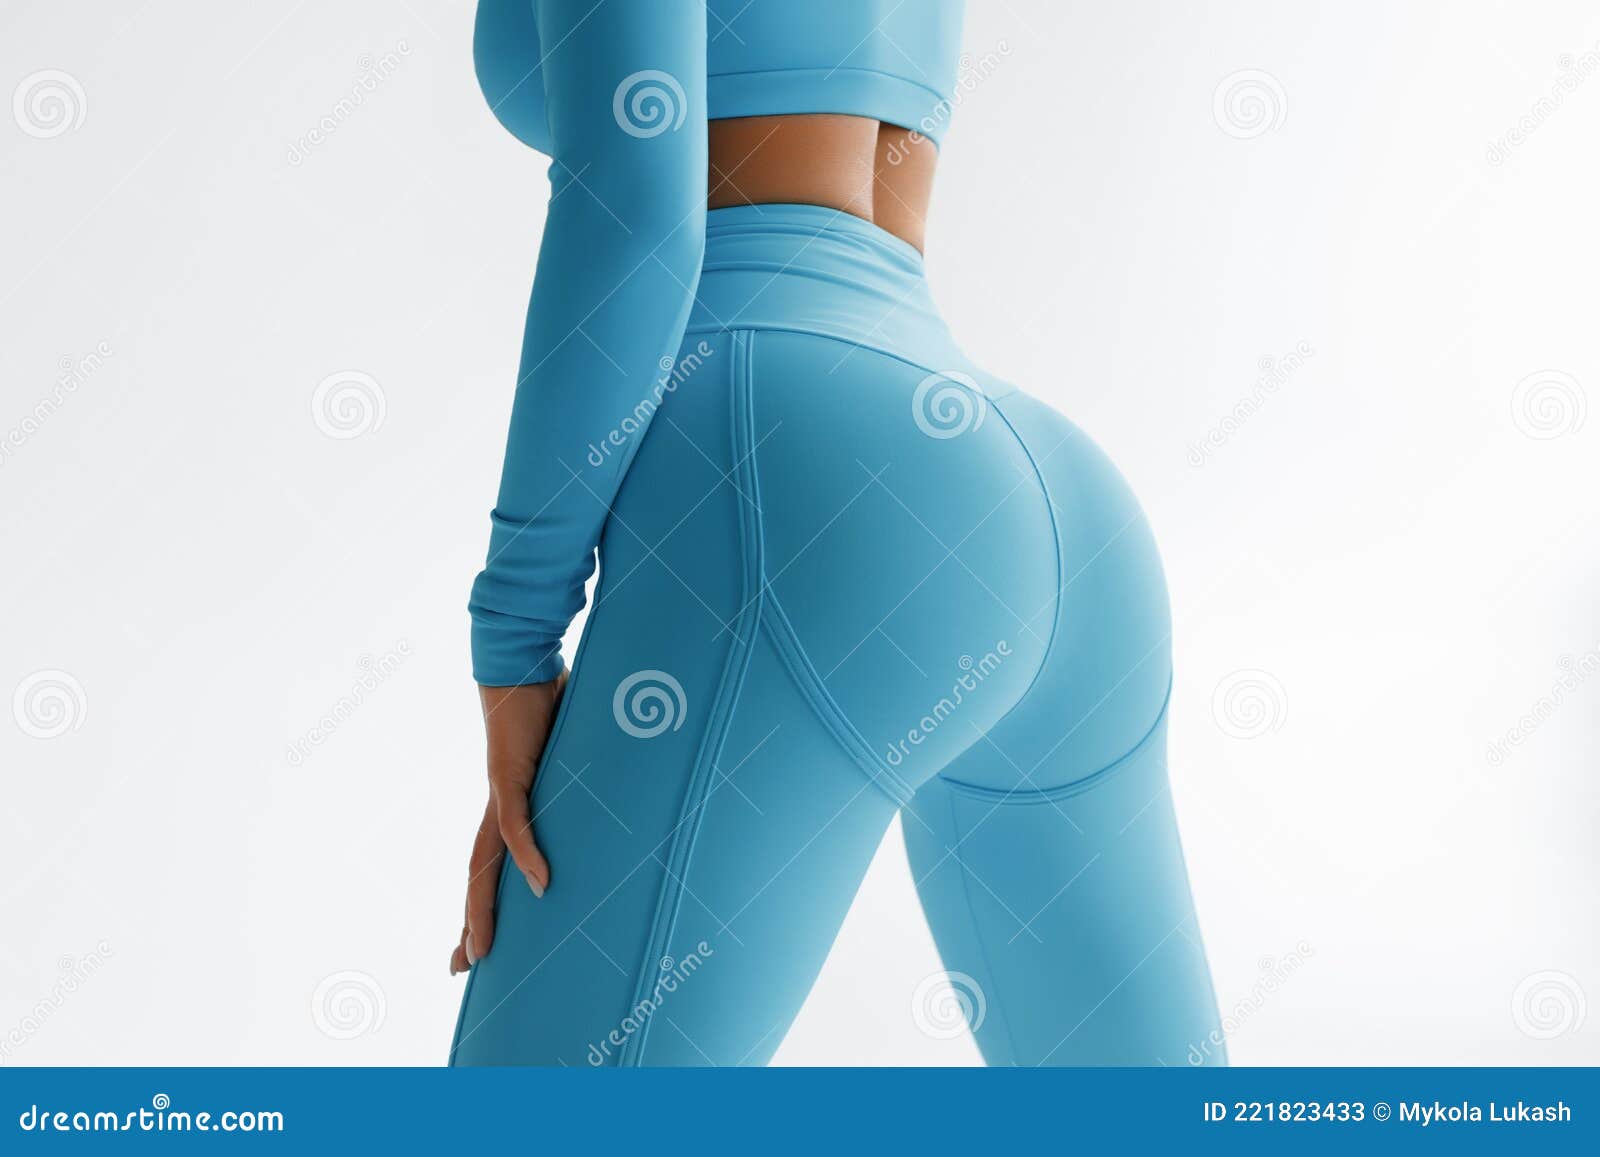 big ass in tight pants nude photo